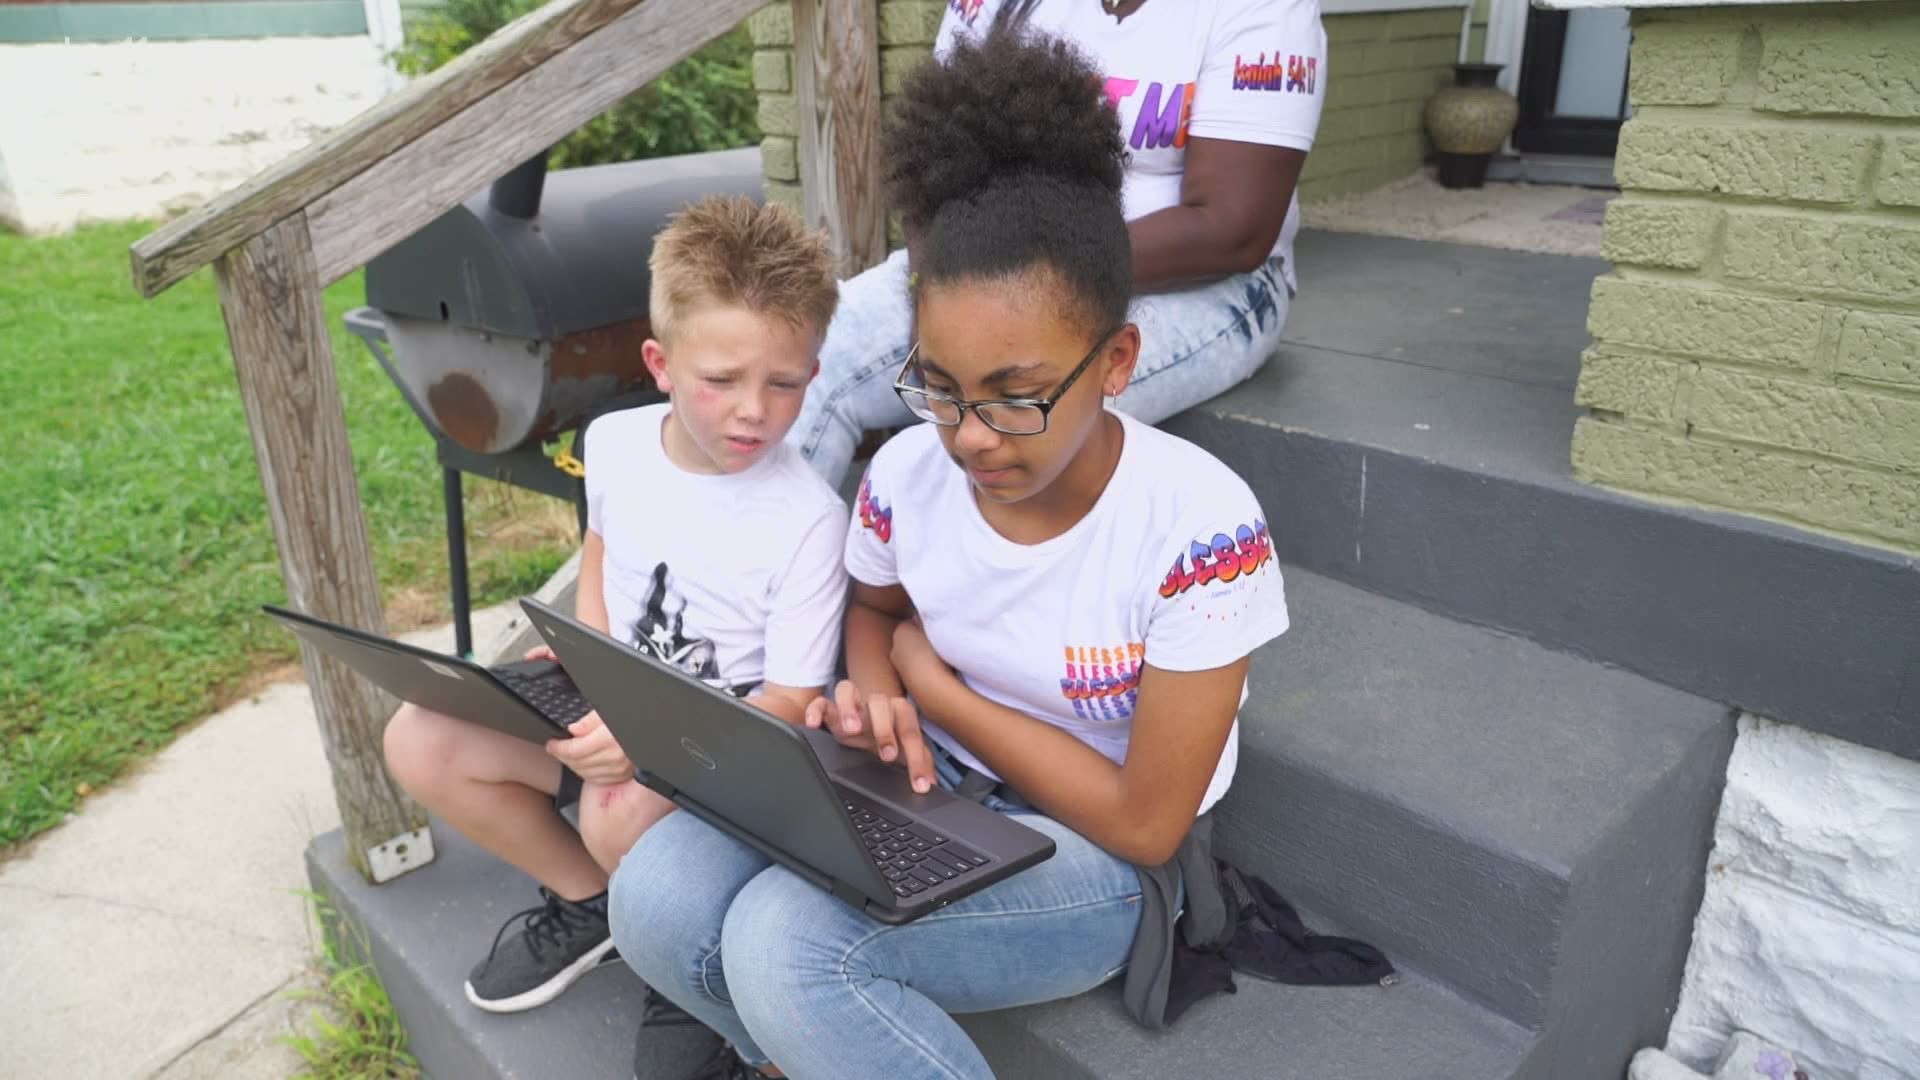 Parents, students and teachers say they have noticed a clear digital divide among students, making life more difficult for those without good internet service.